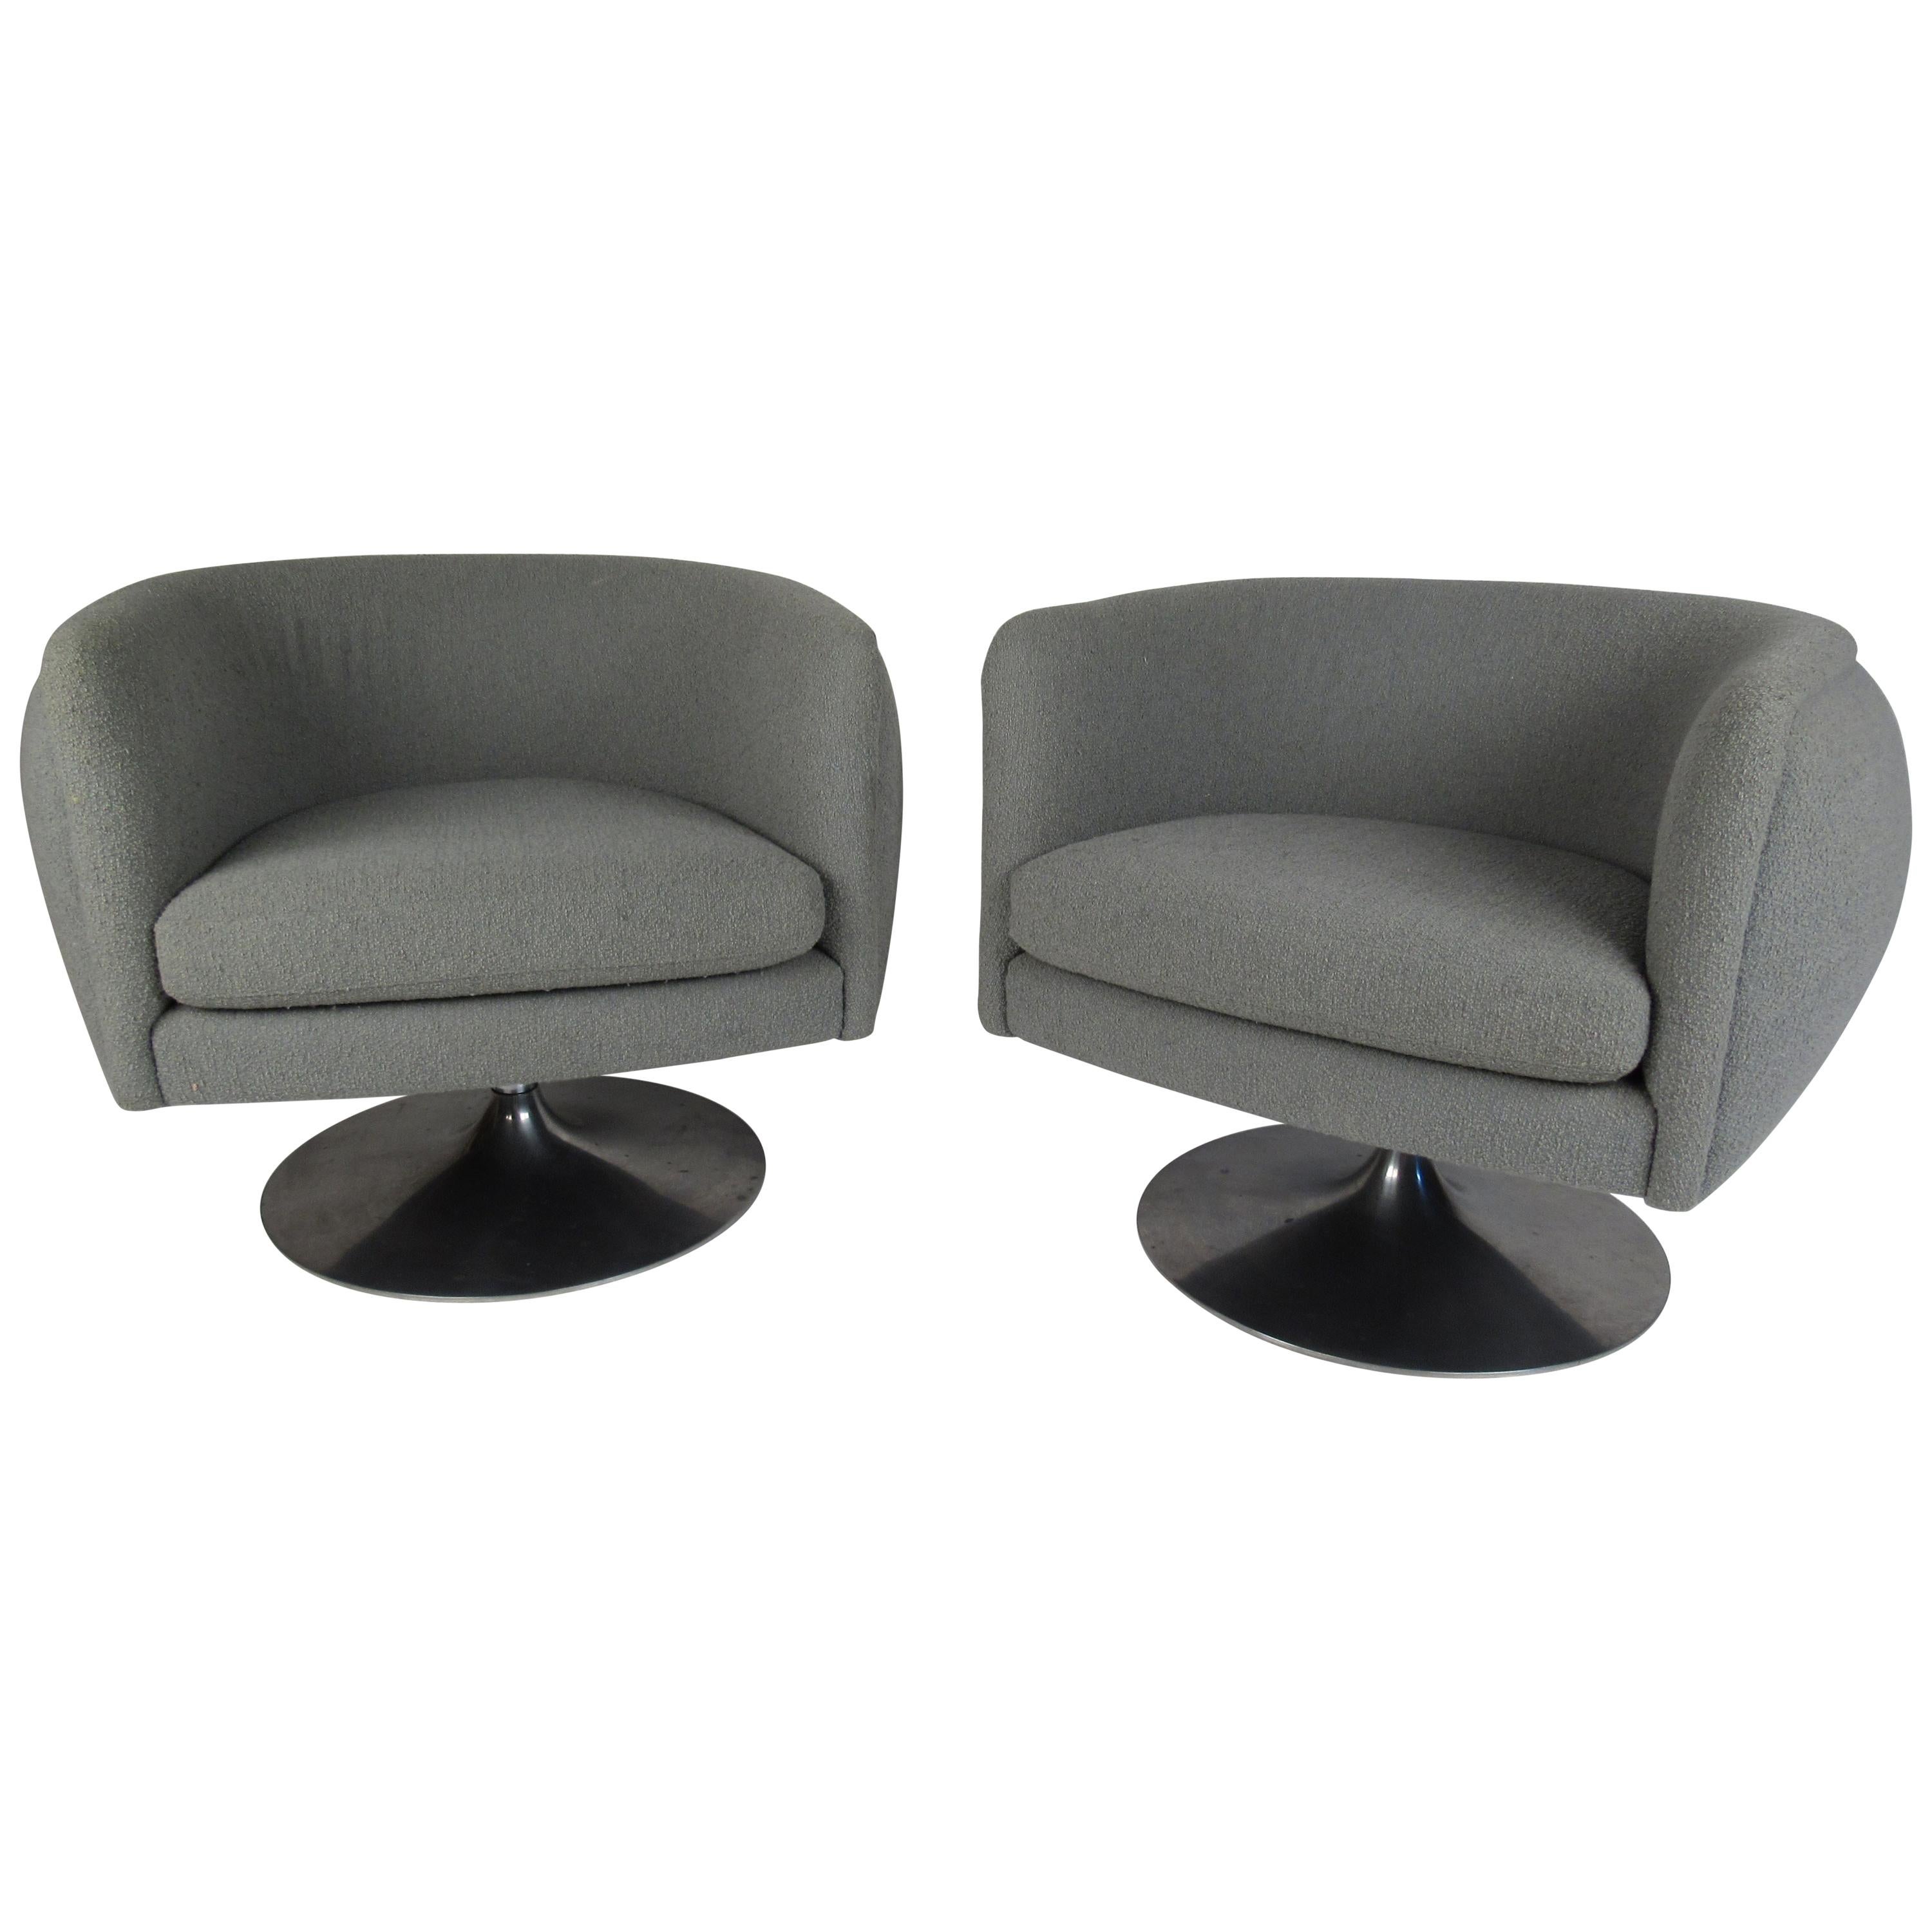 Pair of Tulip Lounge Chairs by Knoll Studios